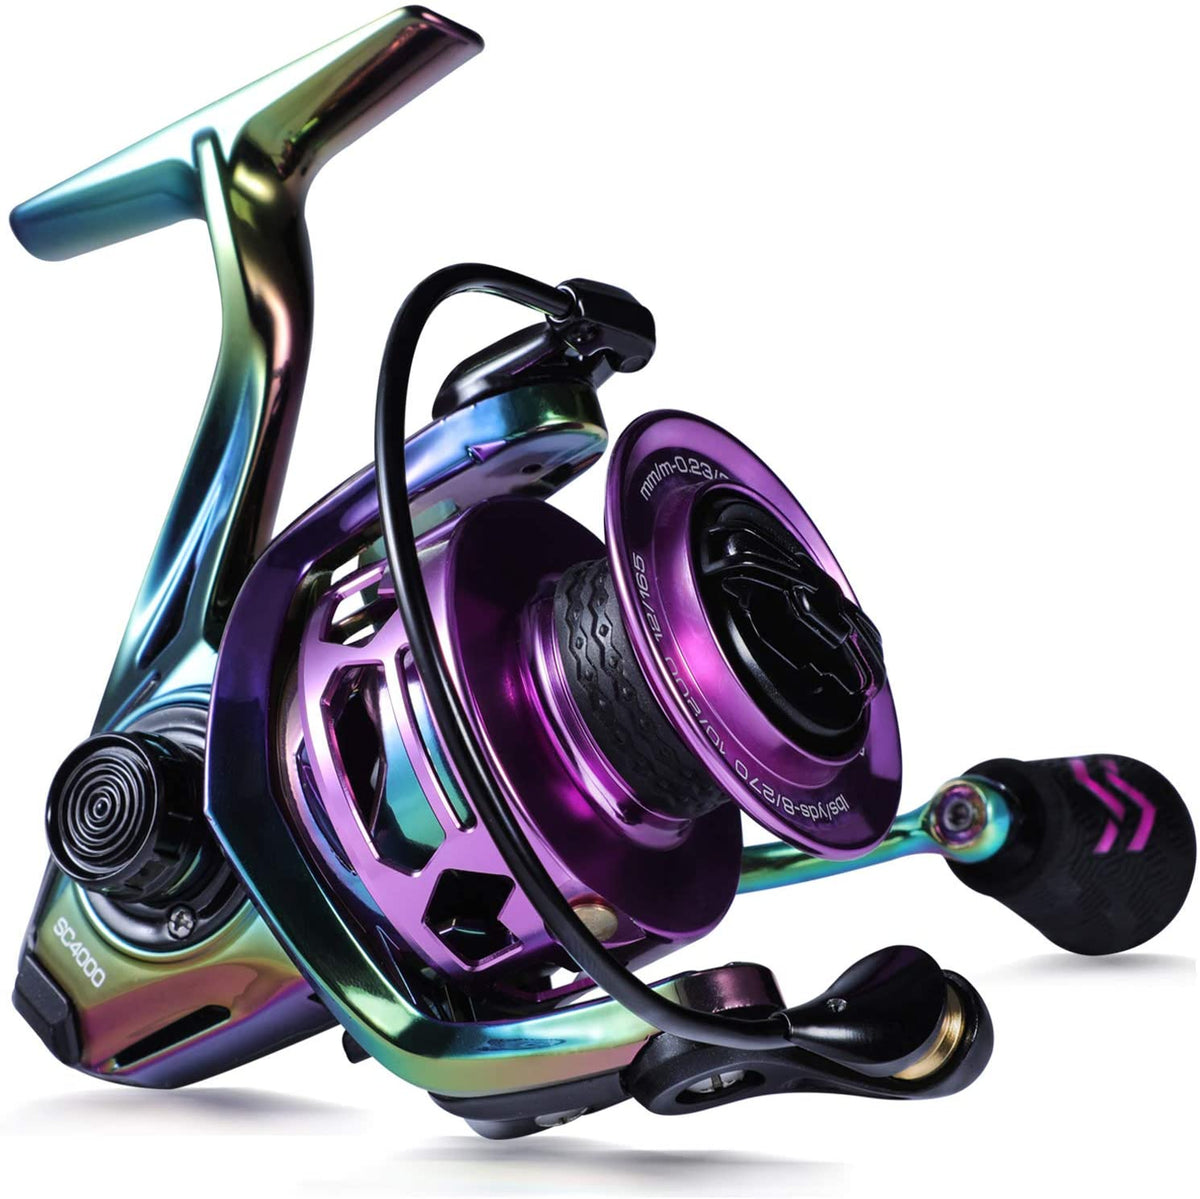 Sougayilang Fishing Reel, Colorful Ultralight Spinning Reels with Graphite  Frame 6.0:1 High Speed, Over 39 lbs Carbon Drag for Saltwater or Freshwater